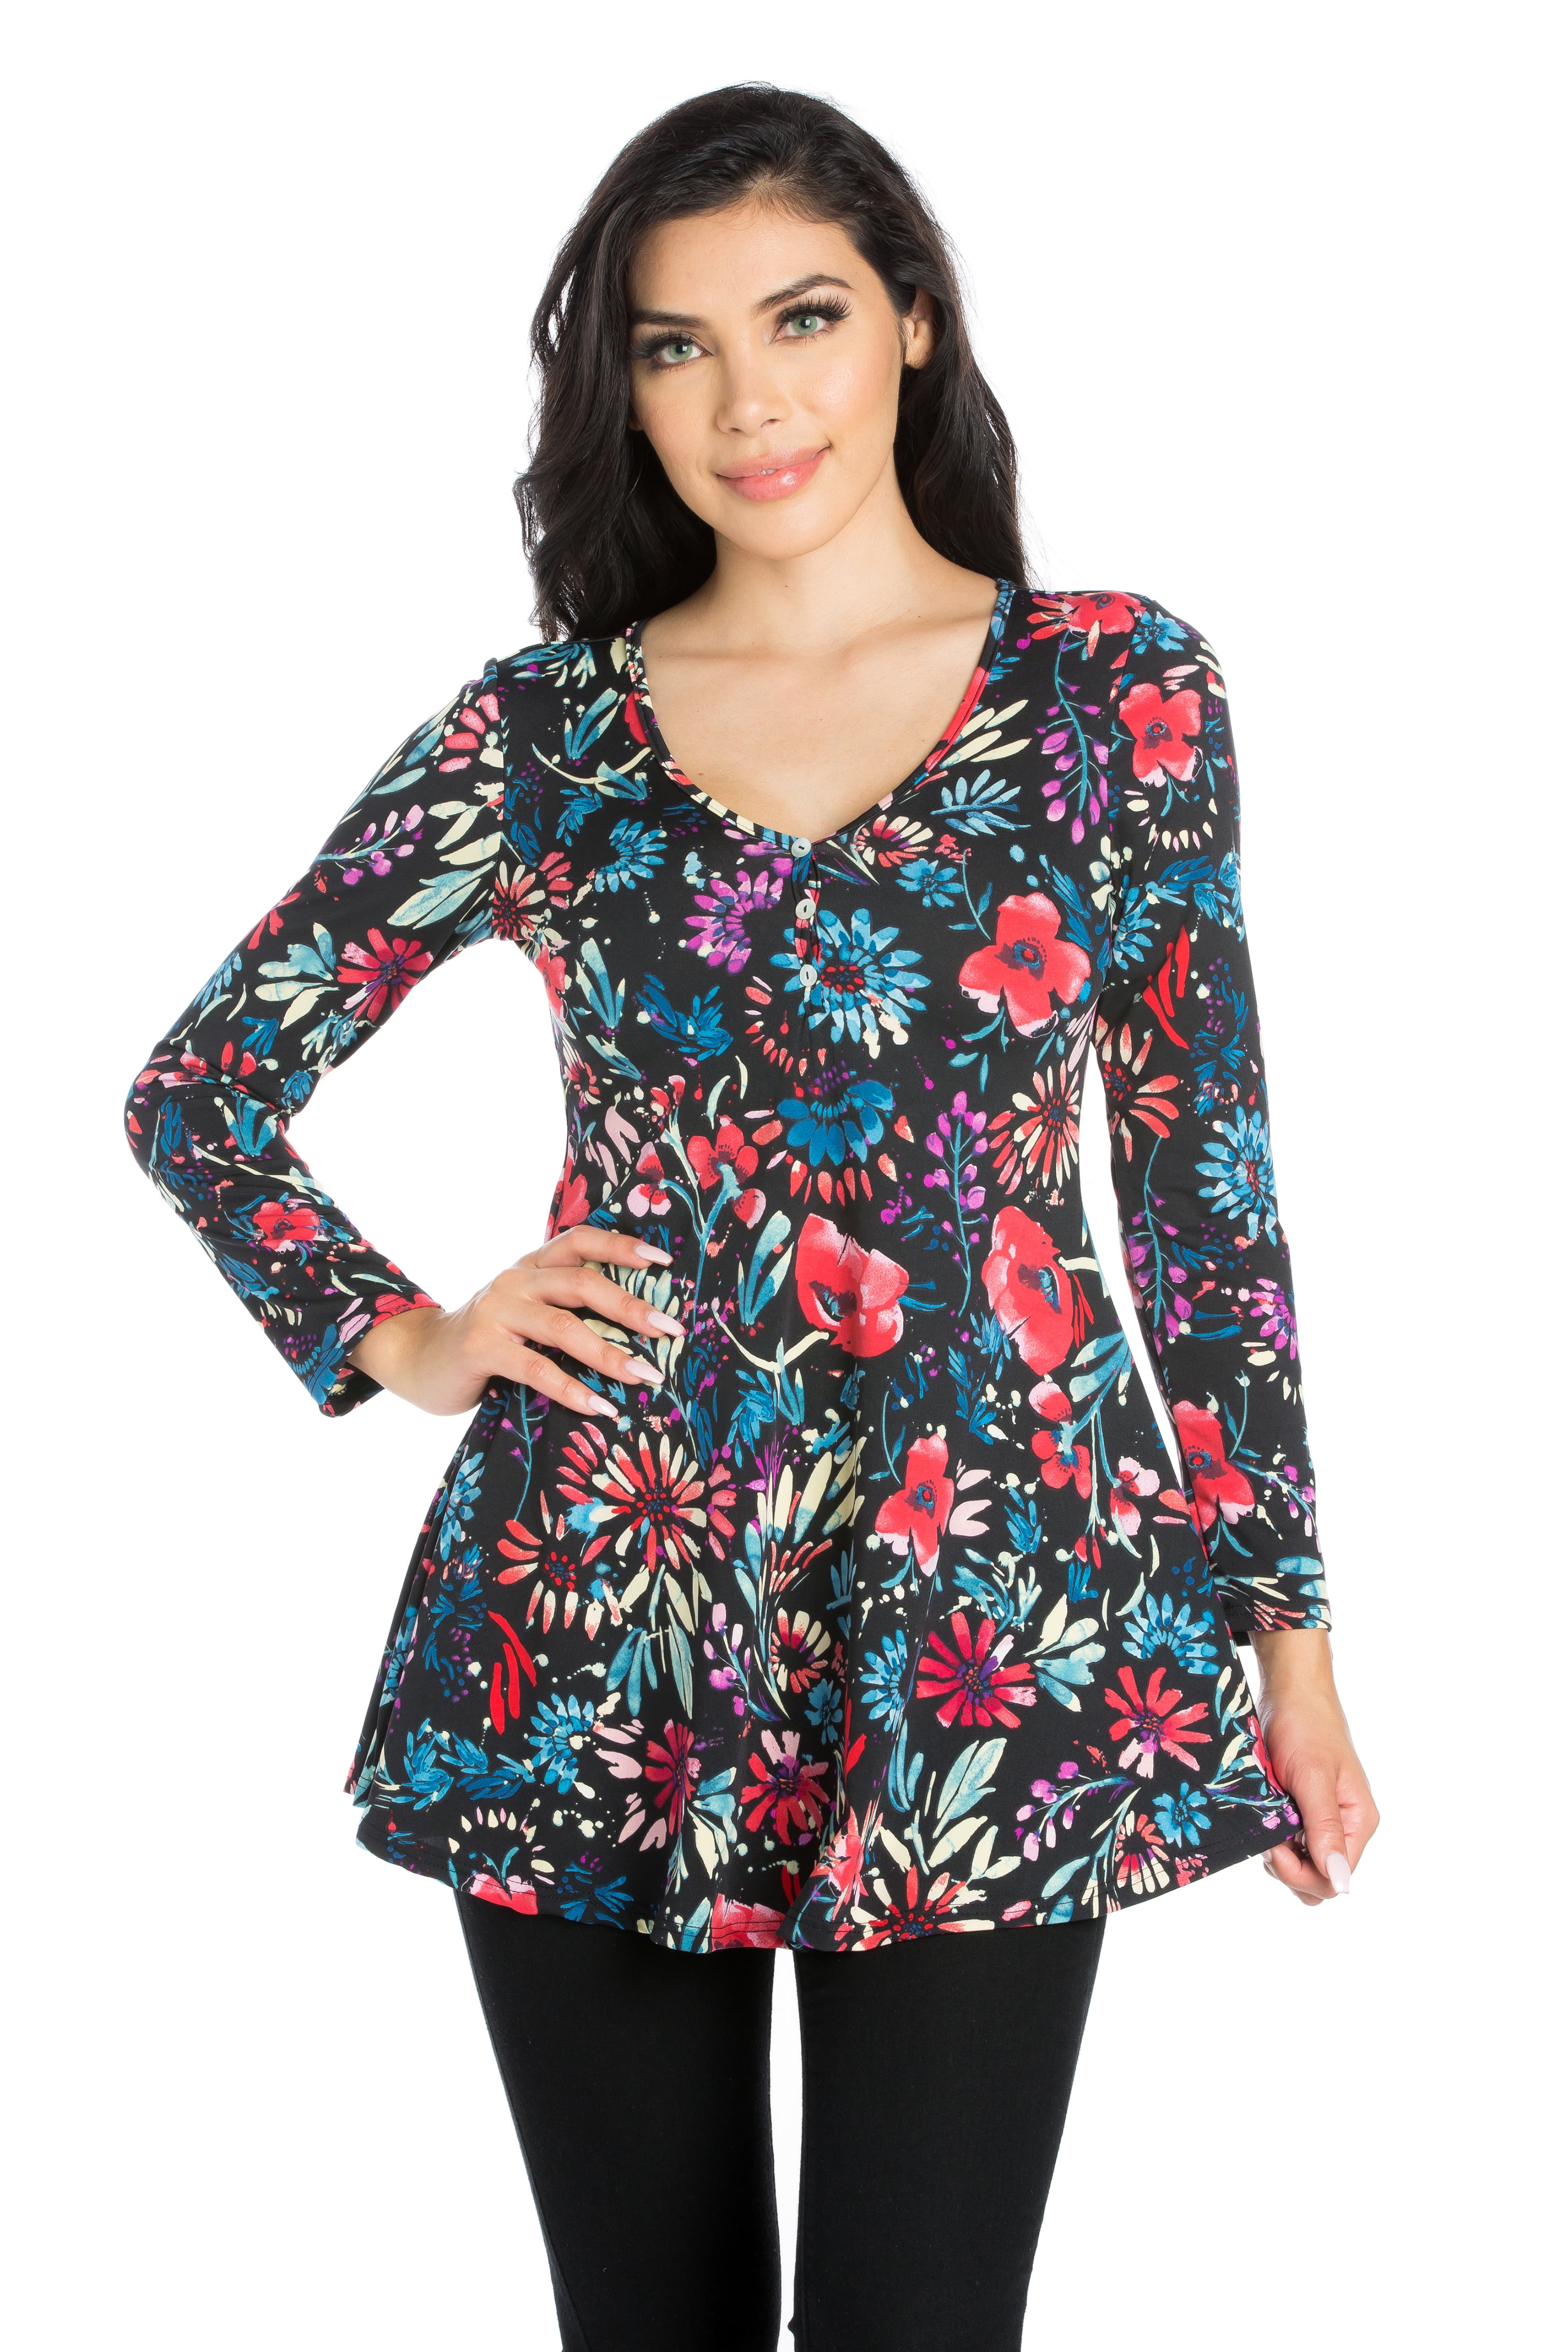 24/7 Comfort Apparel - Women's Flared Floral Long Sleeve Henley Tunic ...